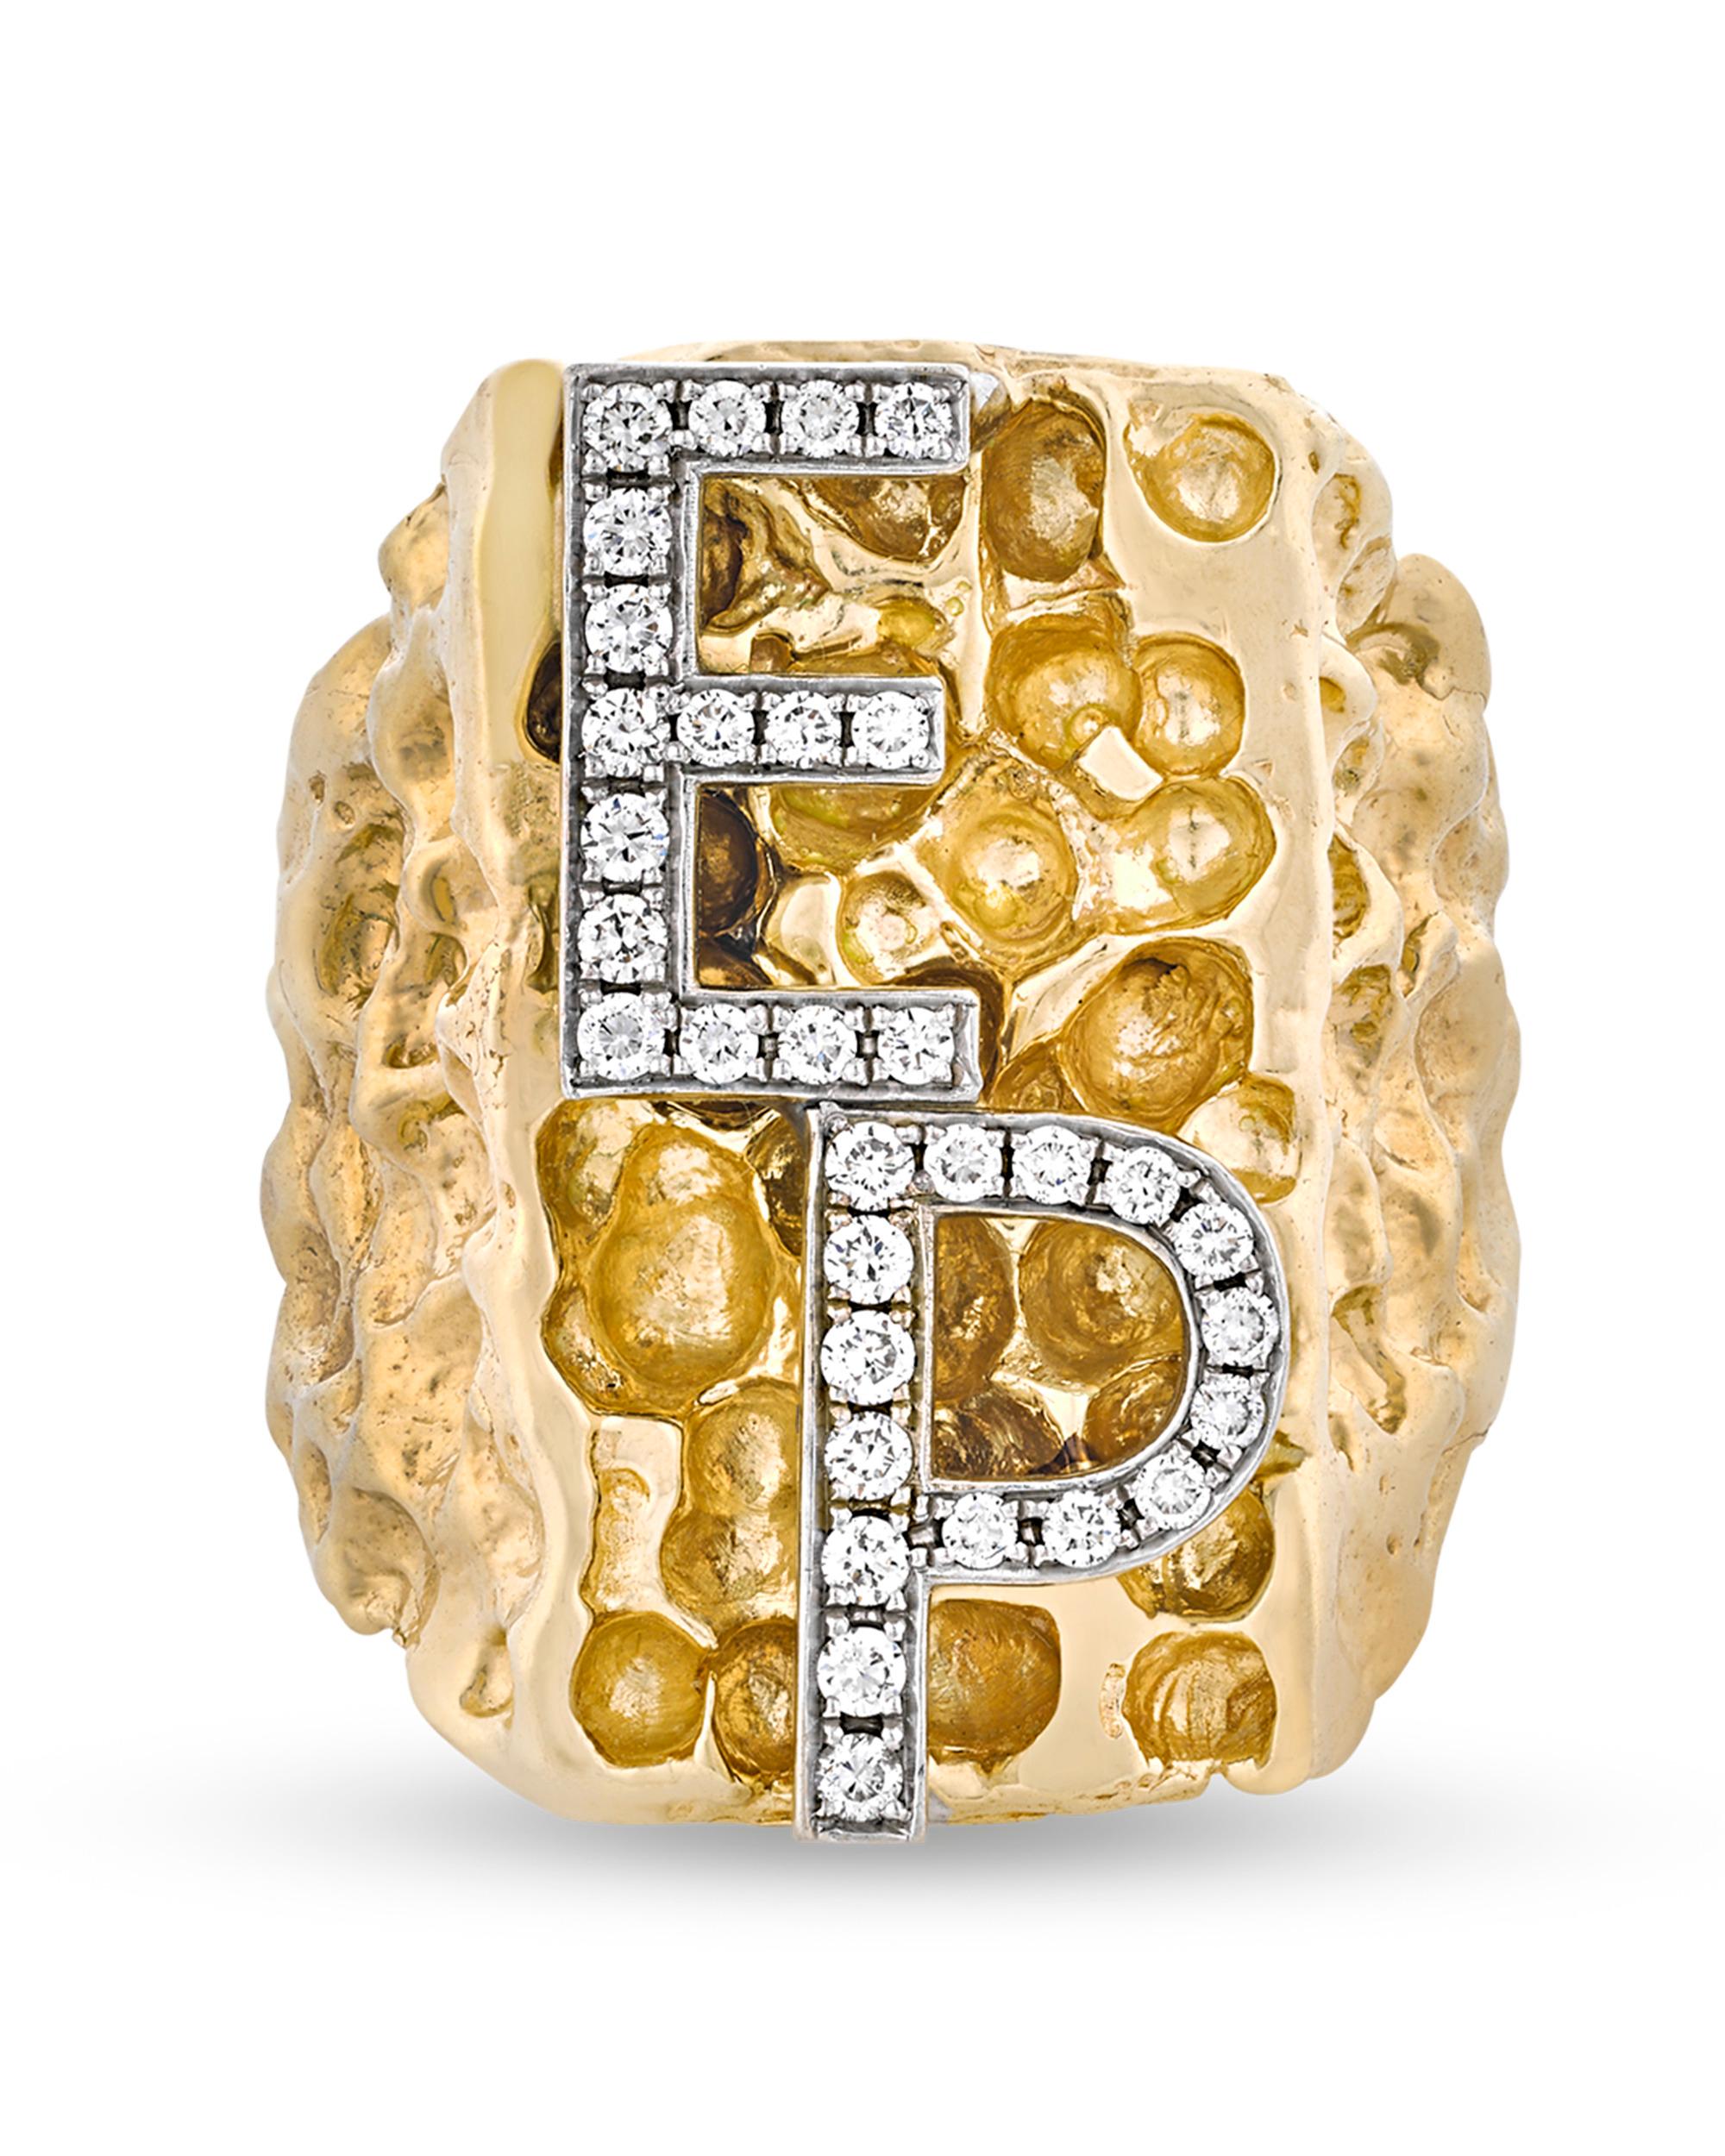 Sensational and completely one of a kind, this ring was made especially for the king of rock 'n' roll, Elvis Presley. The legendary entertainer's initials 